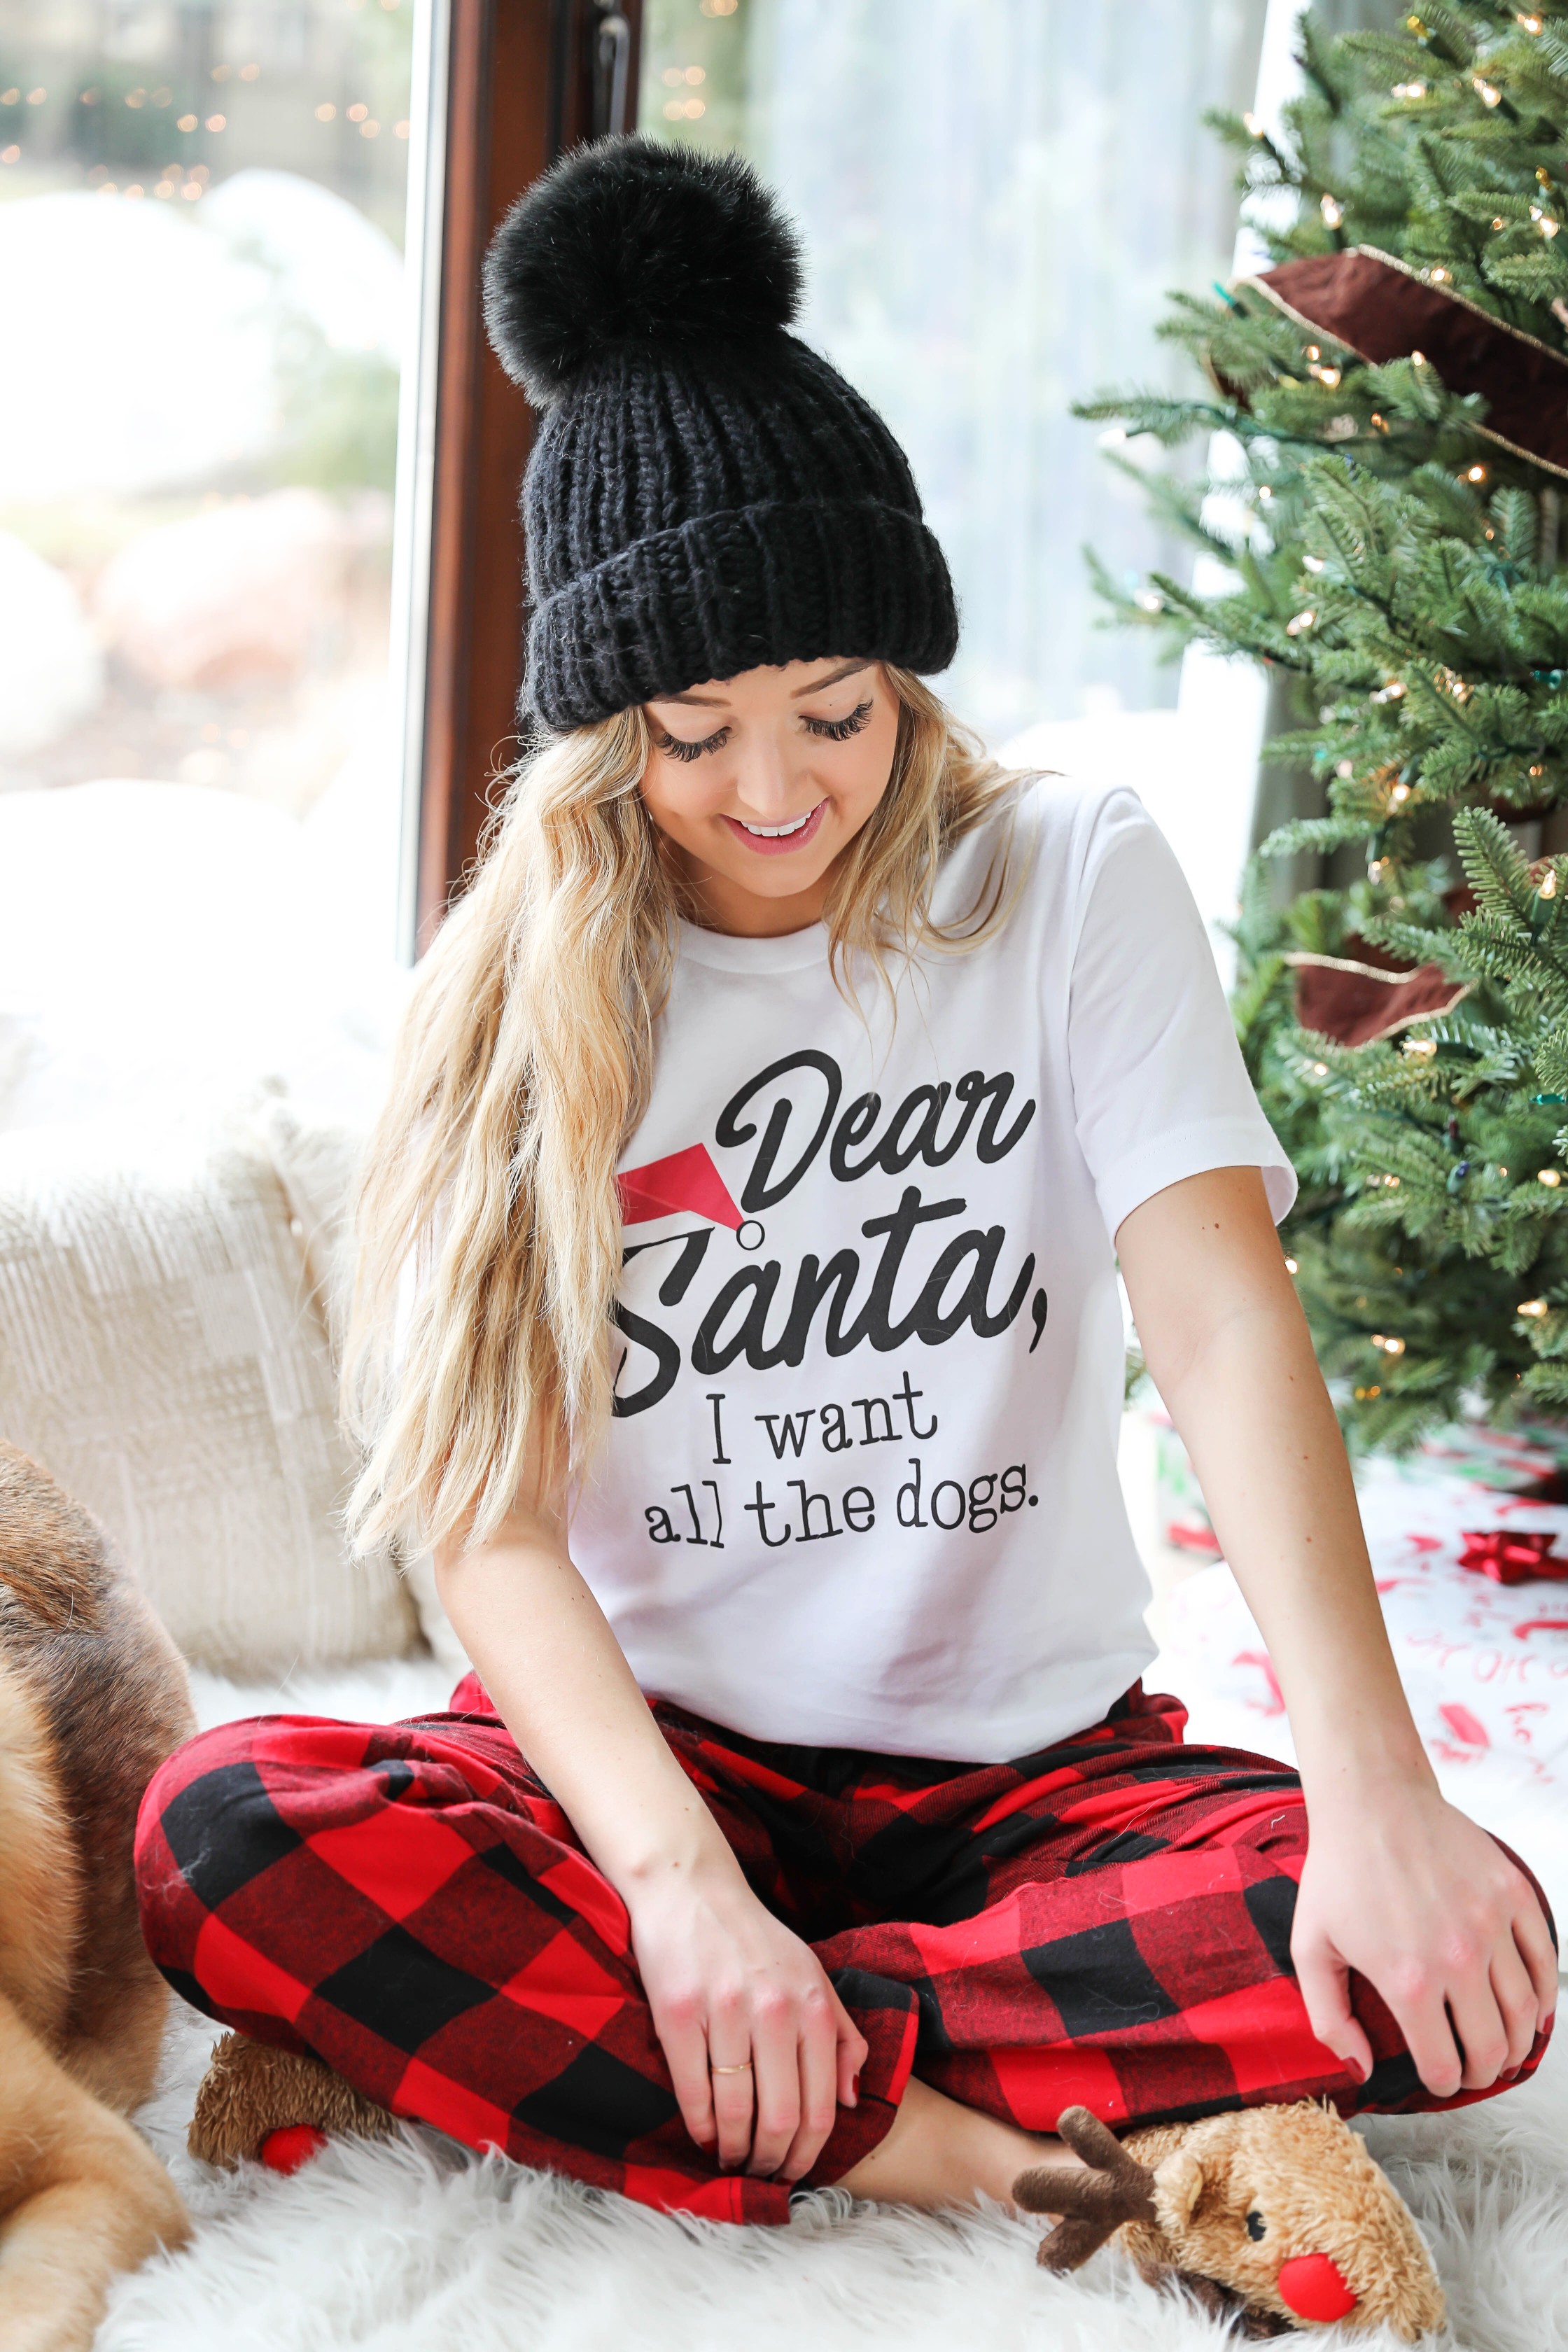 Matching pajamas with my puppy! My dog and I wear matching chrismas pjs every year! This is my puppy, beau, the pomeranian! Cute Christmas photoshoot on fashion blog daily dose of charm by lauren lindmark